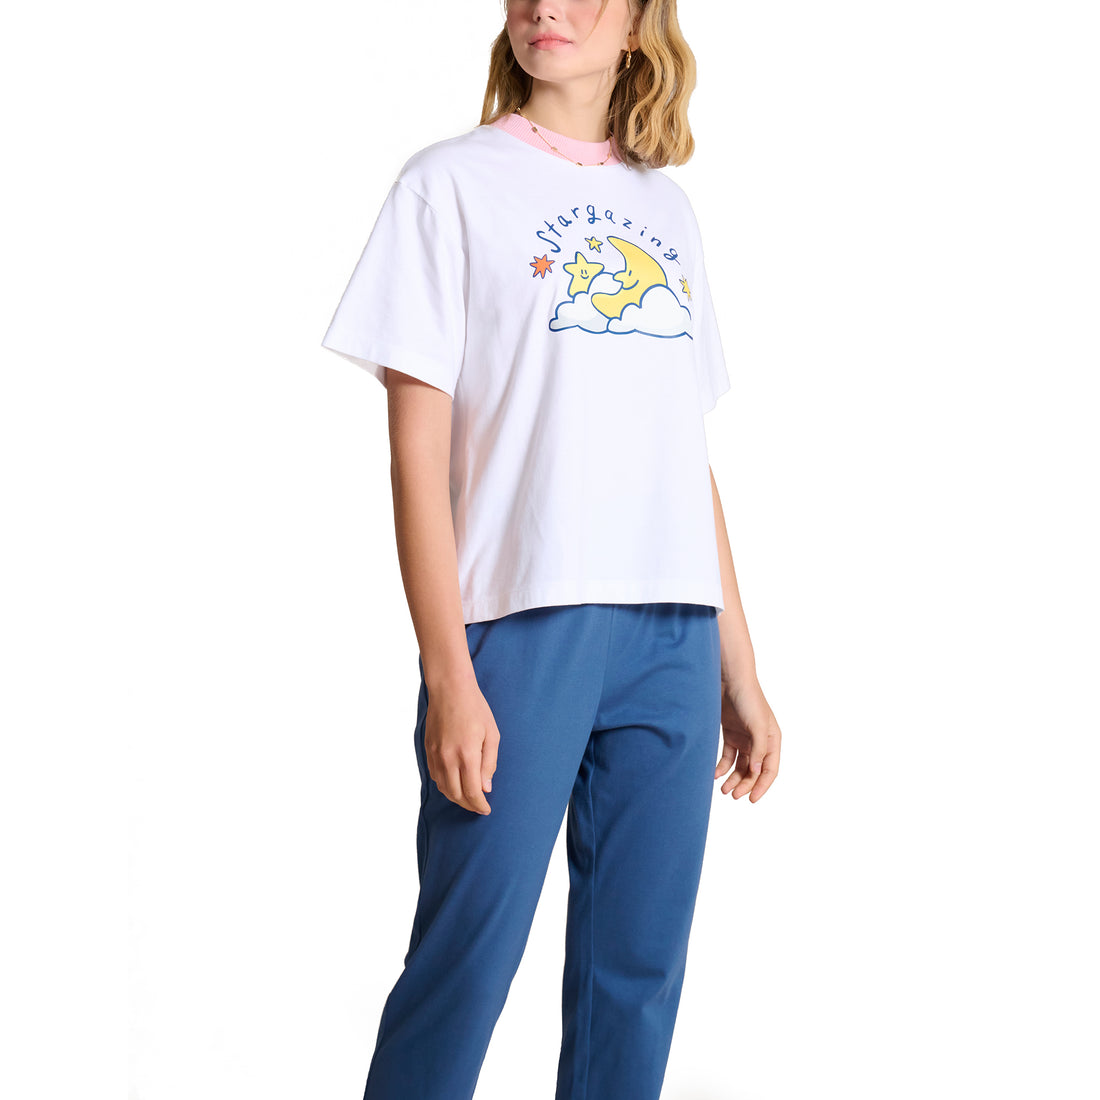 Wacoal x Fluffy Omelet All-Day Comfy Stargazing Short Sleeve T-shirt a –  Thai Wacoal Public Company Limited